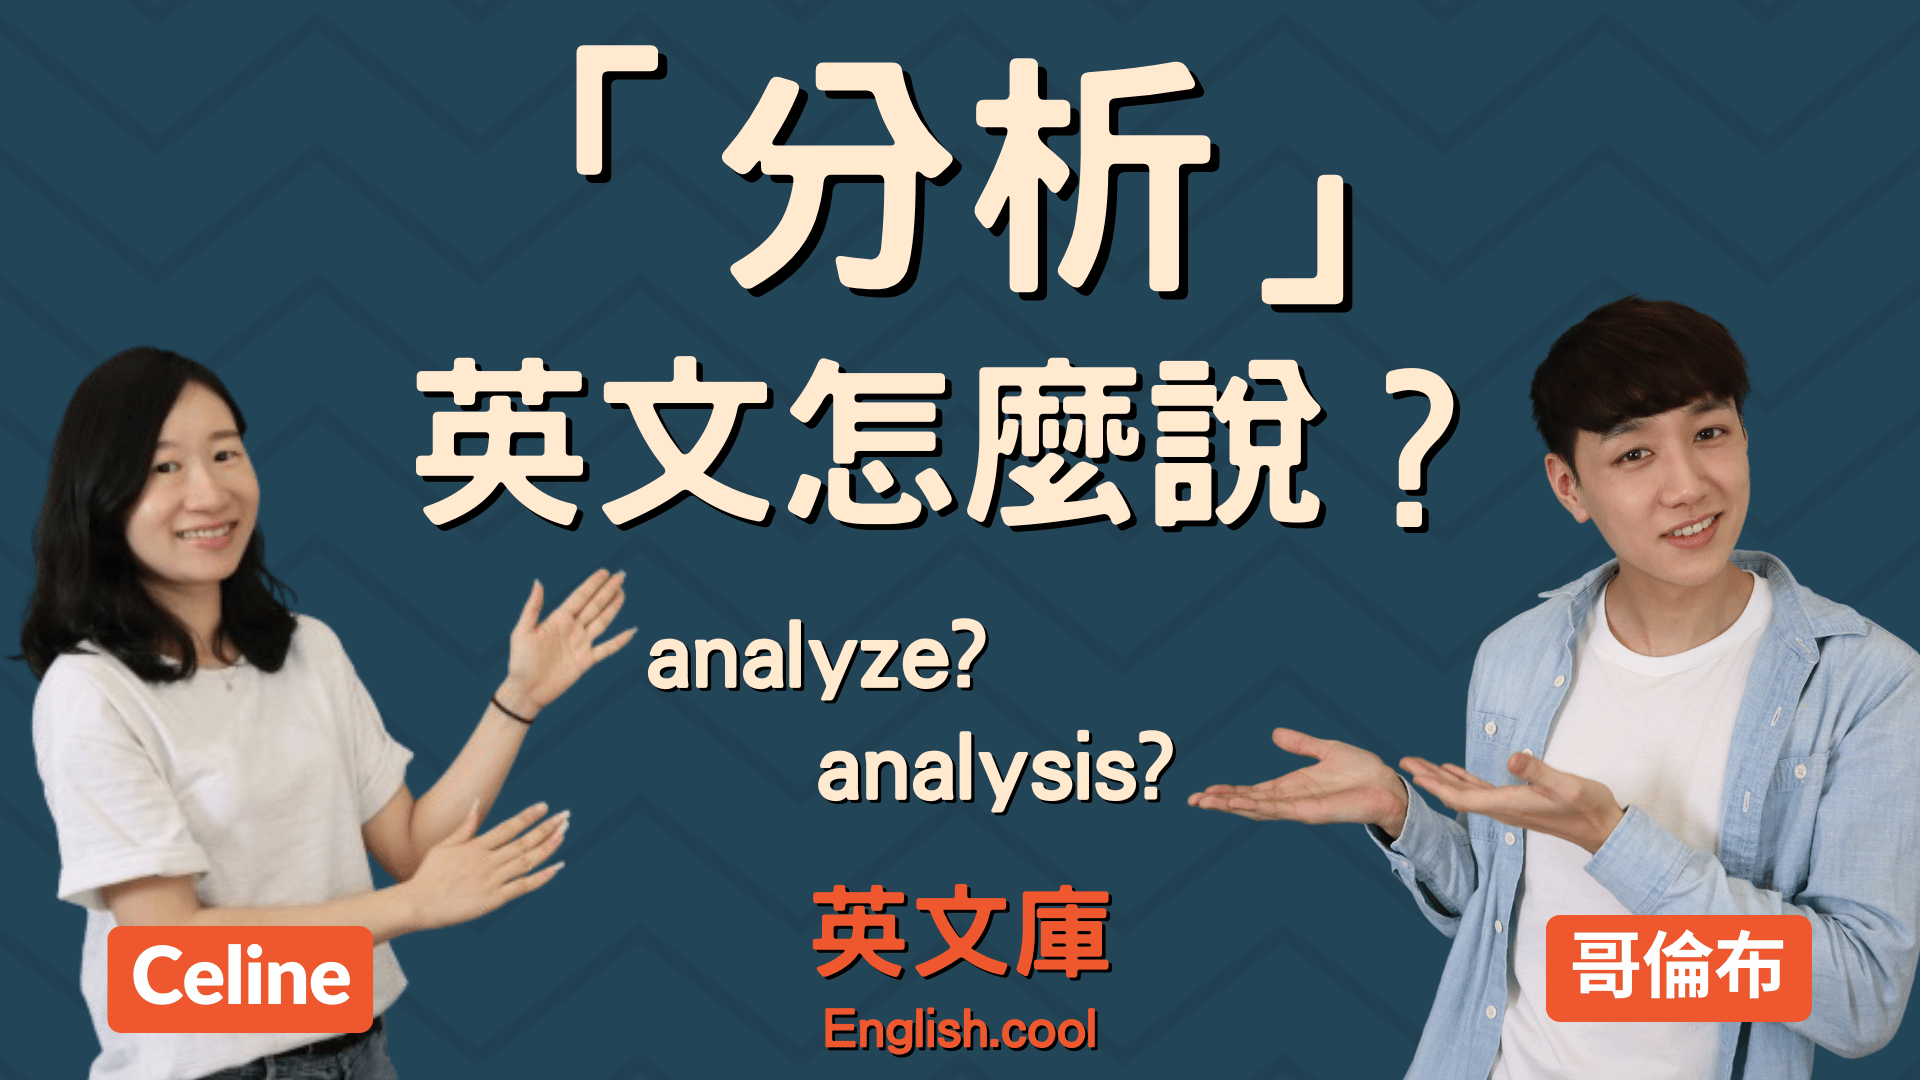 You are currently viewing 「分析」英文是？analyze? analysis?